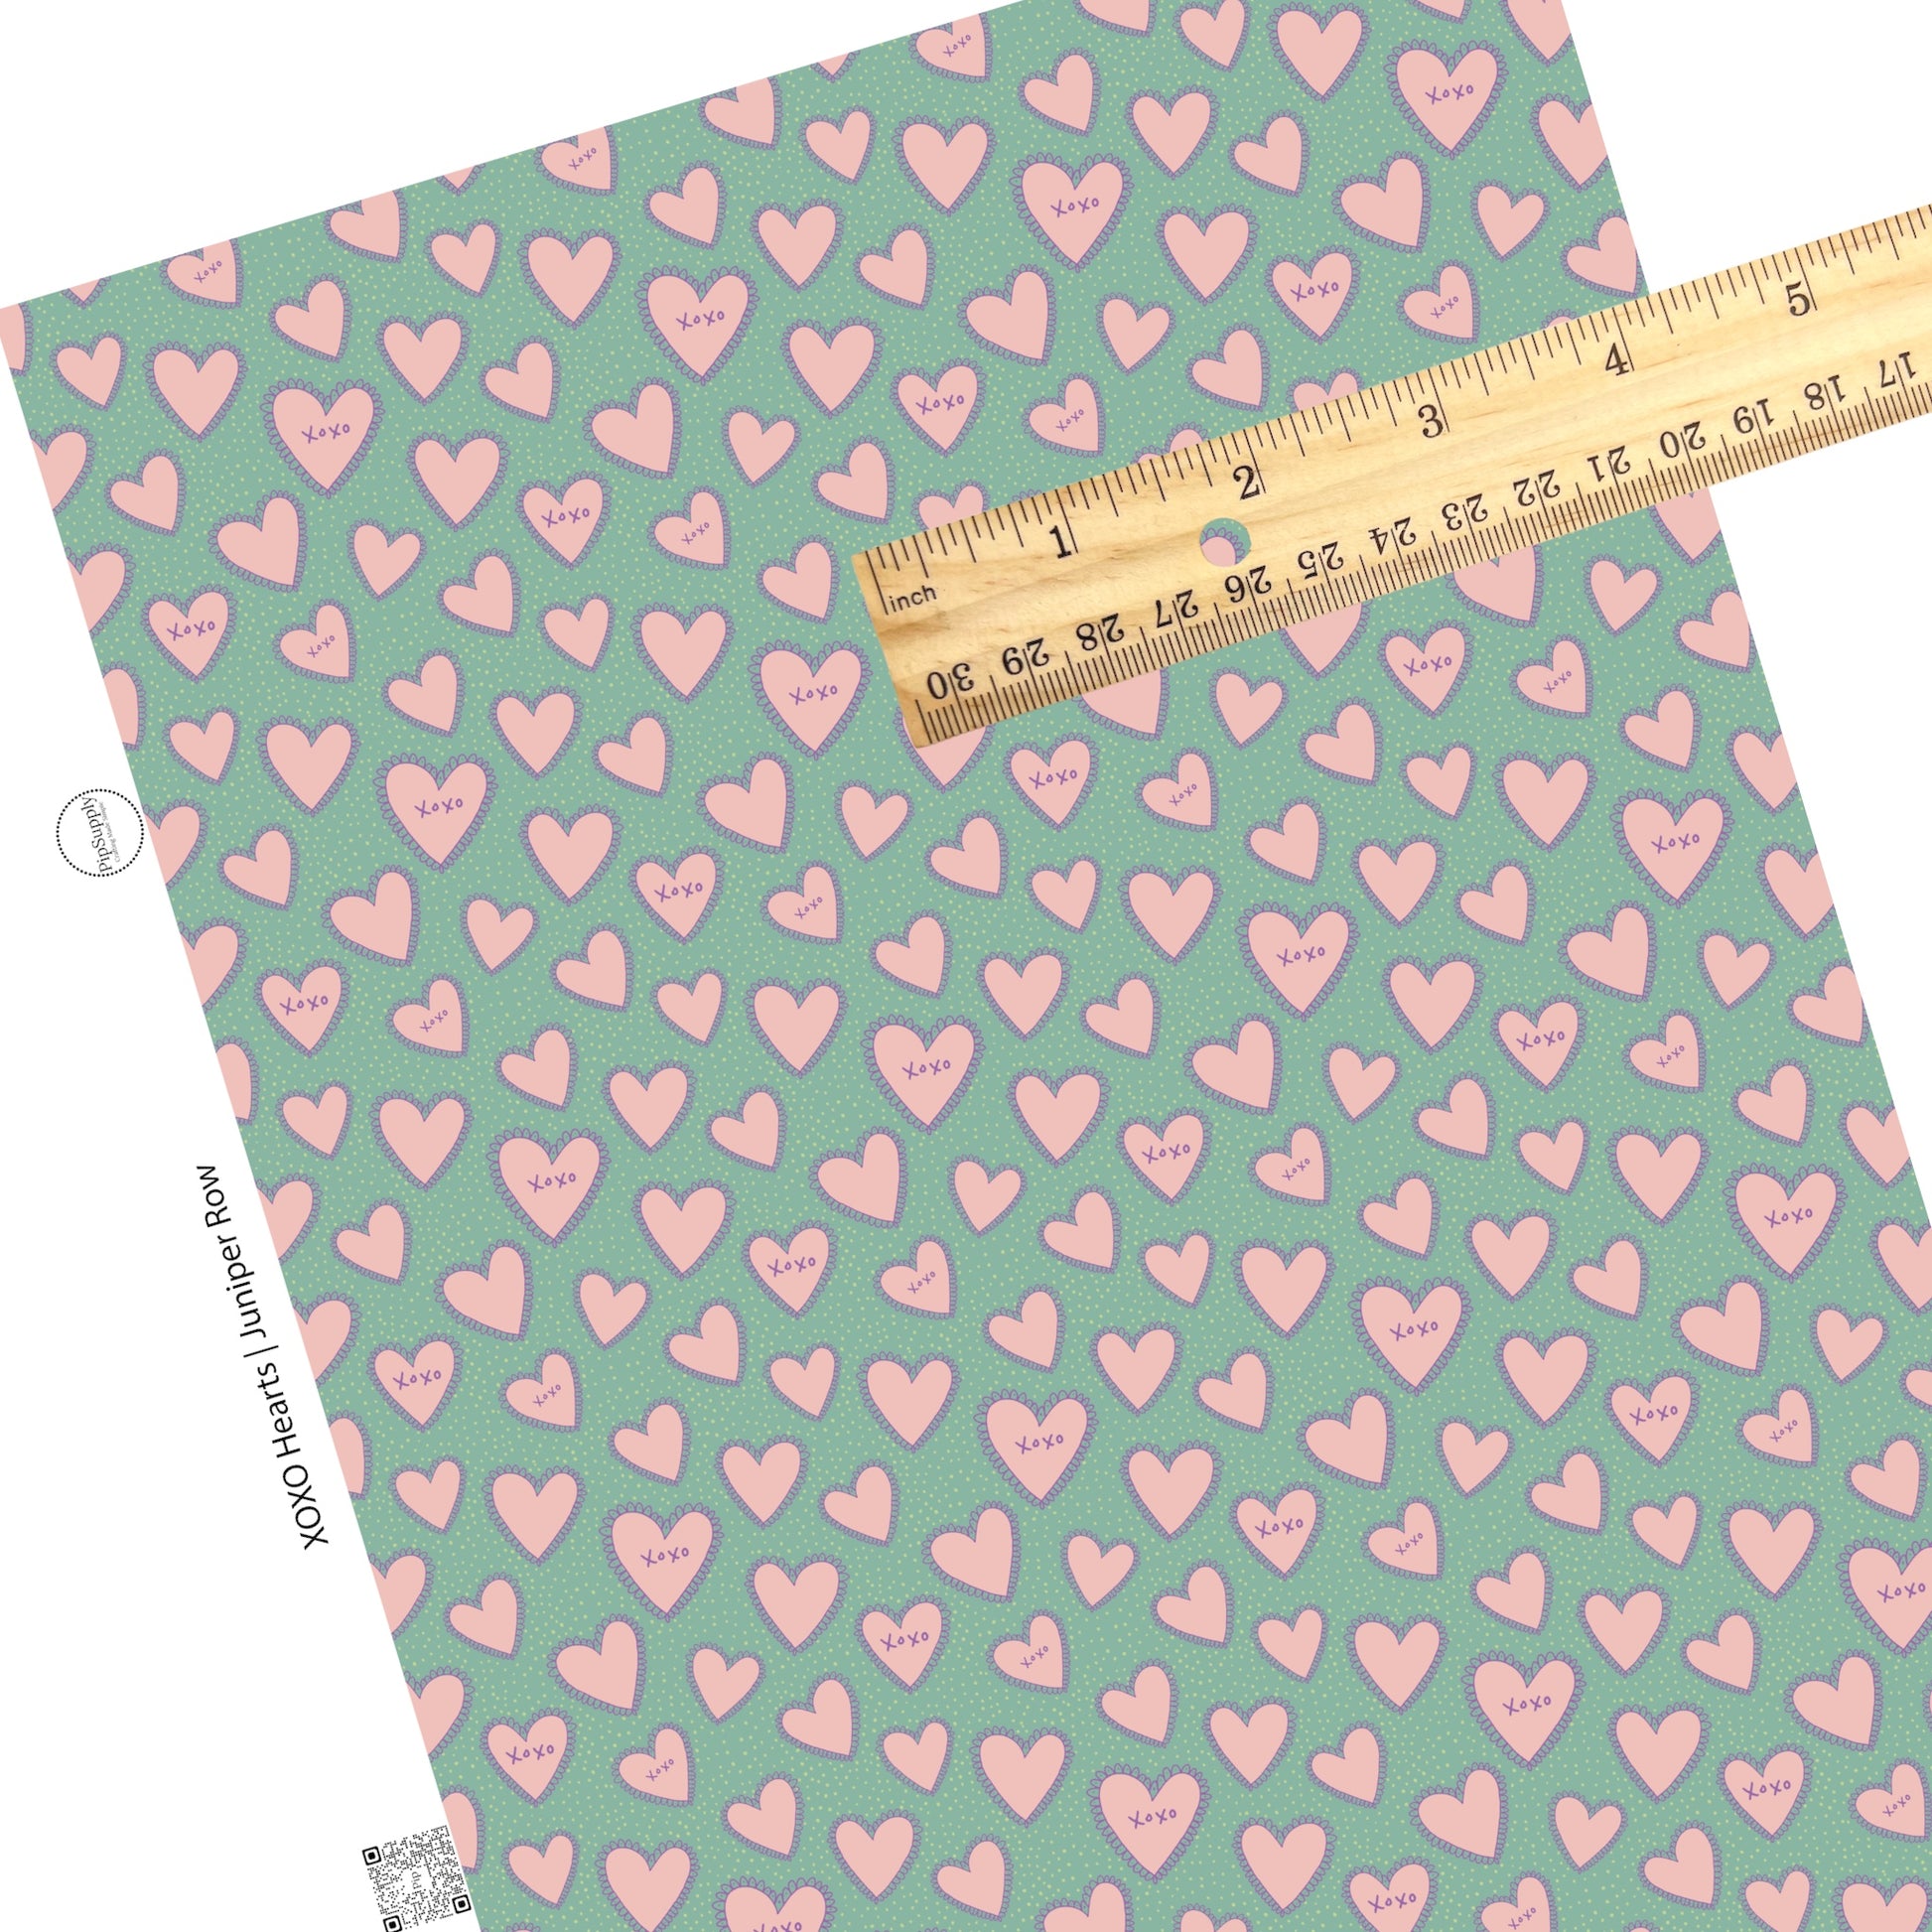 Seafoam faux leather with white polka dots and purple outlined pink hearts with XOXO words